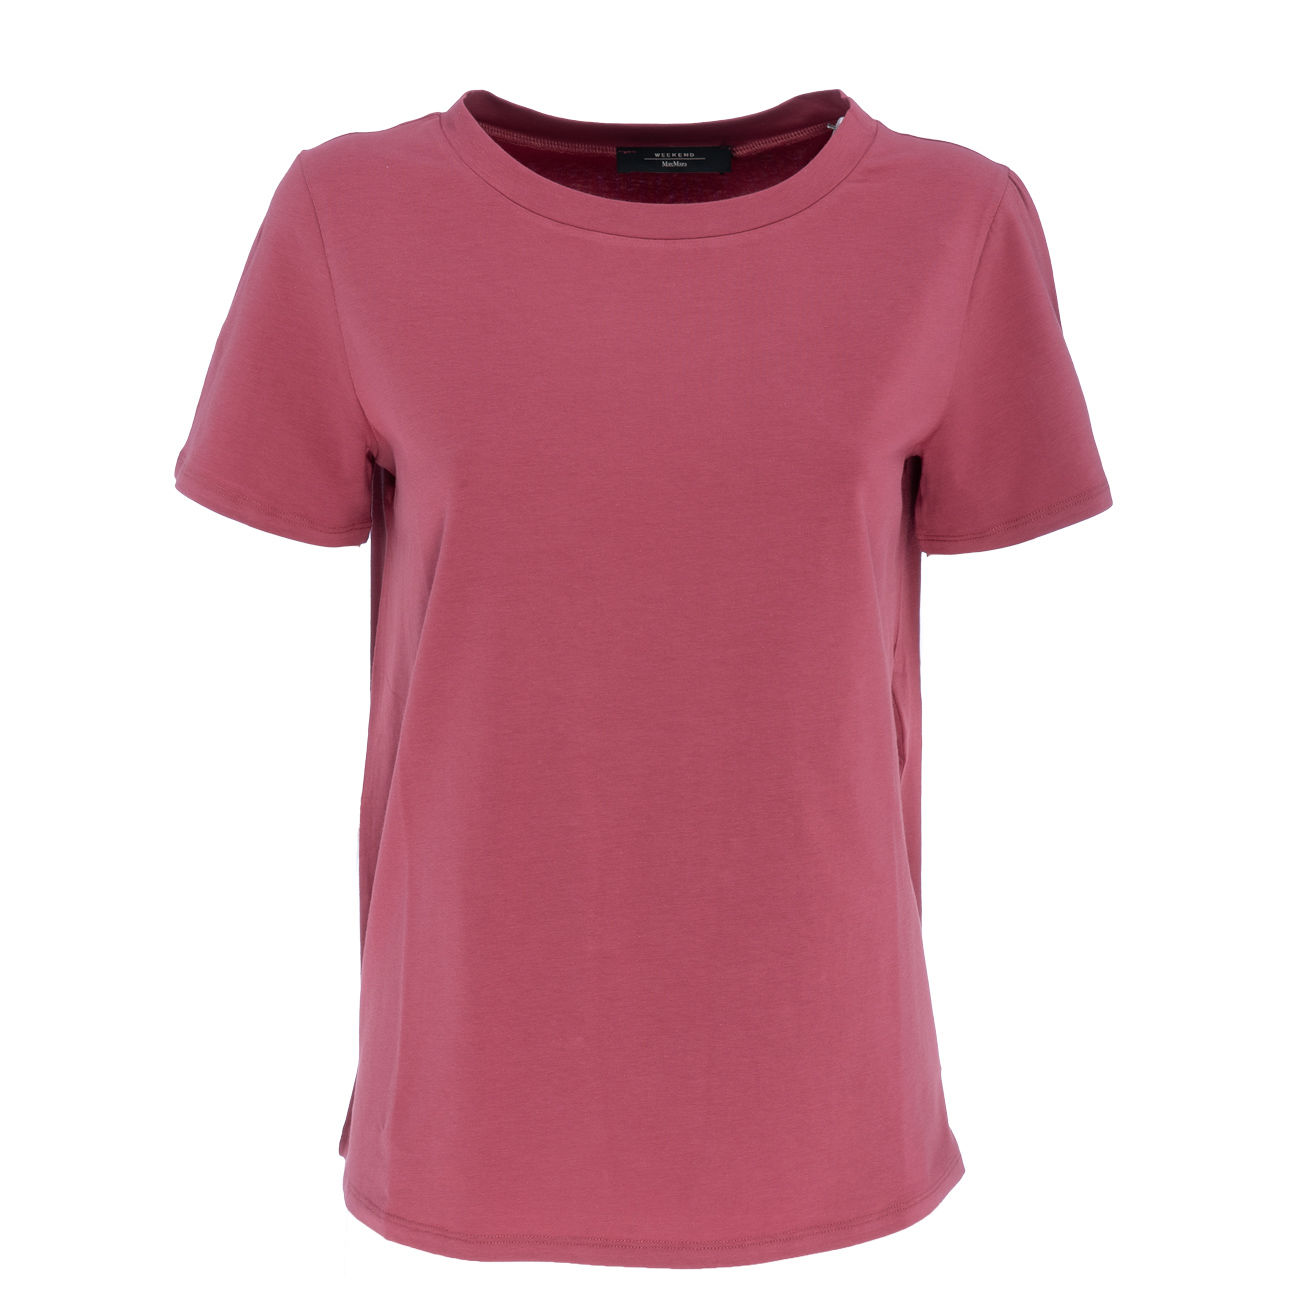 T-shirt Donna In Jersey Di Cotone